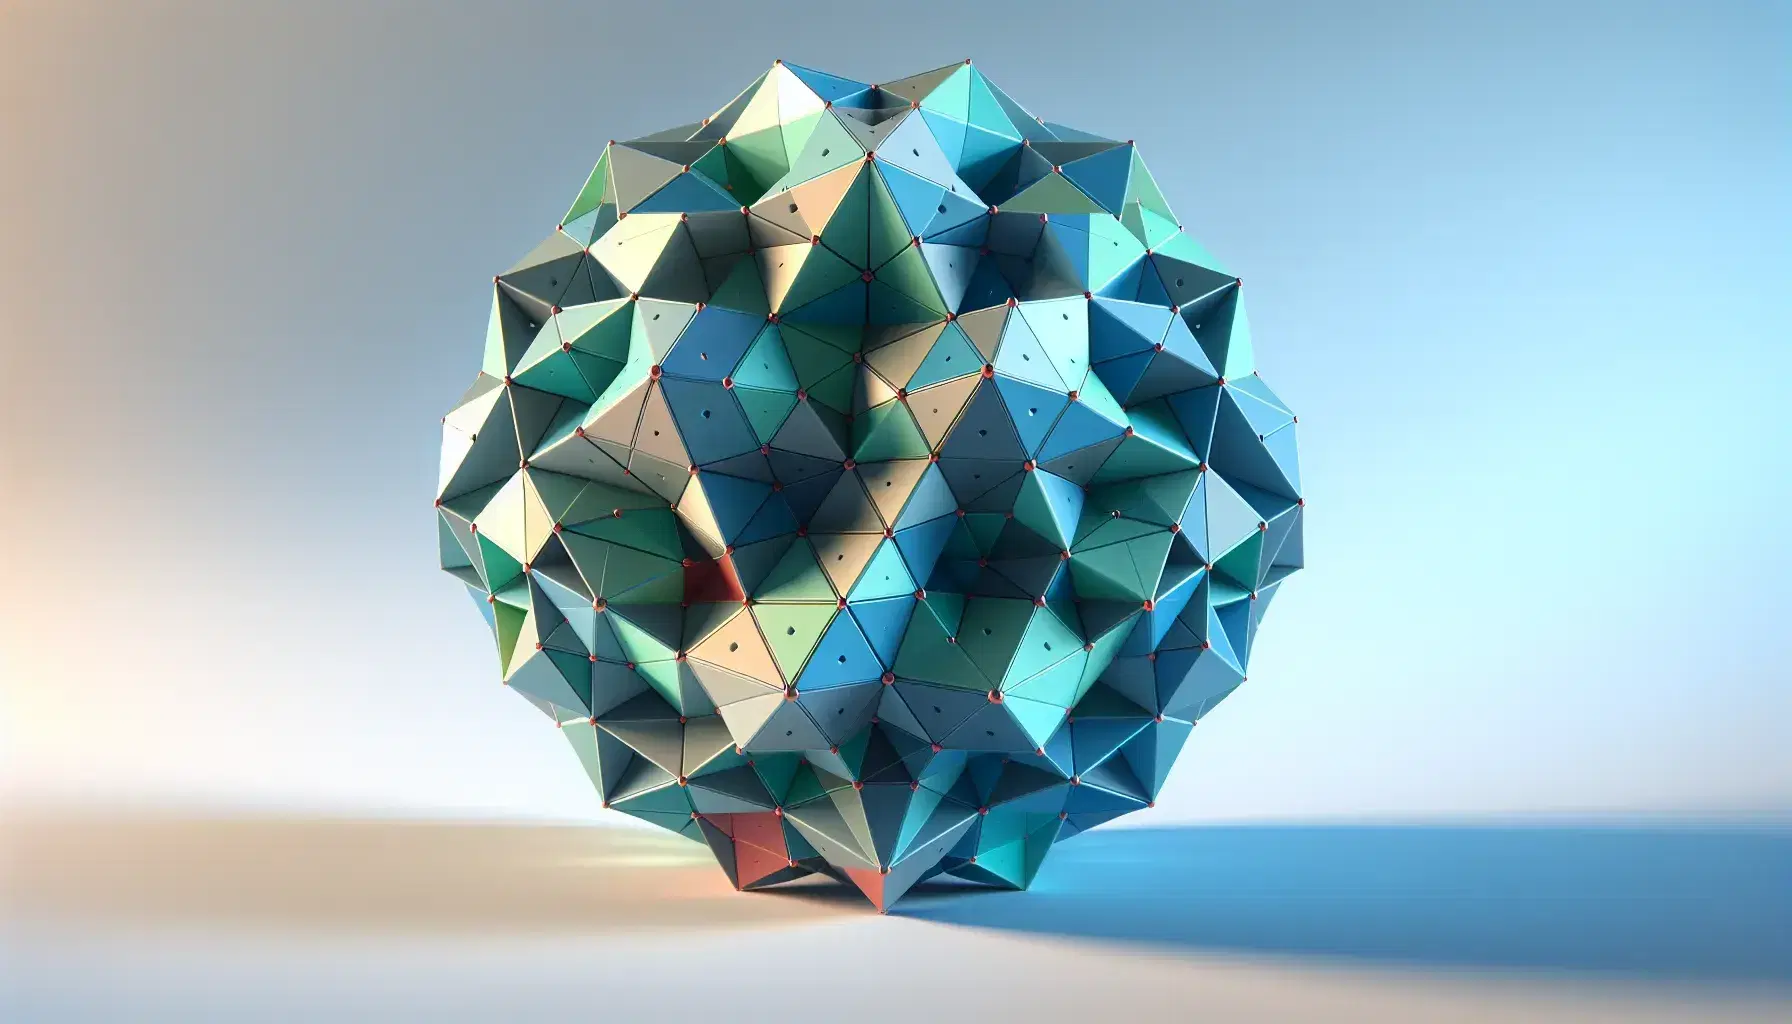 Colorful 3D polyhedron model with varied polygonal faces, casting a soft shadow on a light gray surface against a gradient blue-white background.